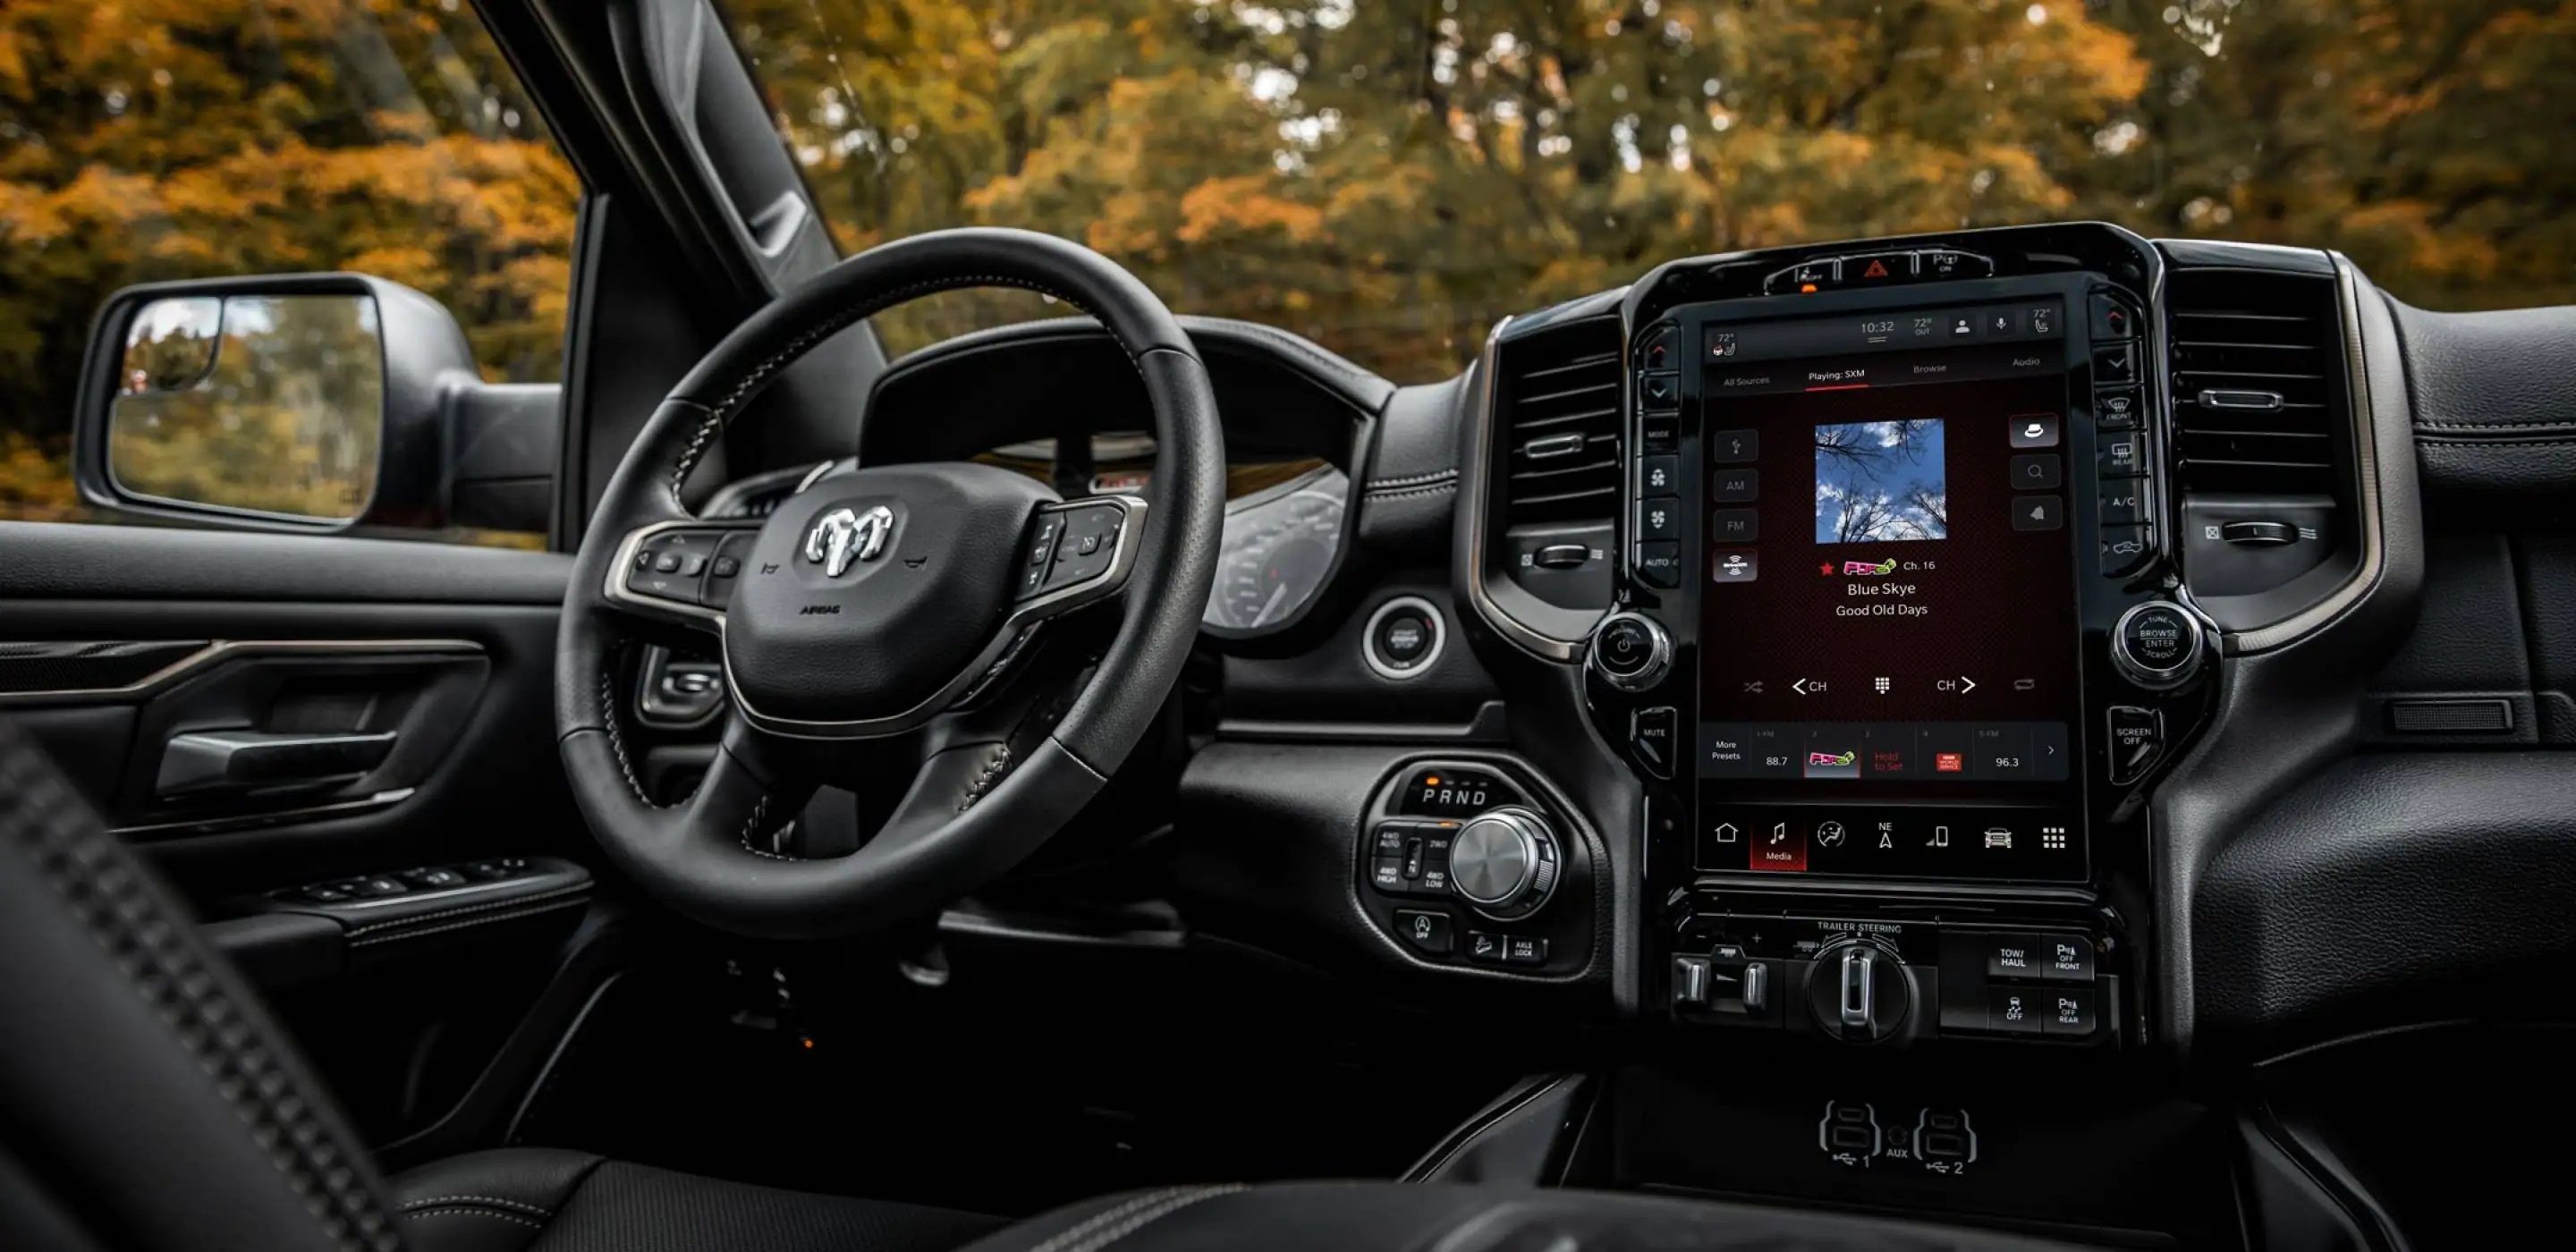 The interior of the 2022 Ram 1500 Built To Serve Firefighter Edition.